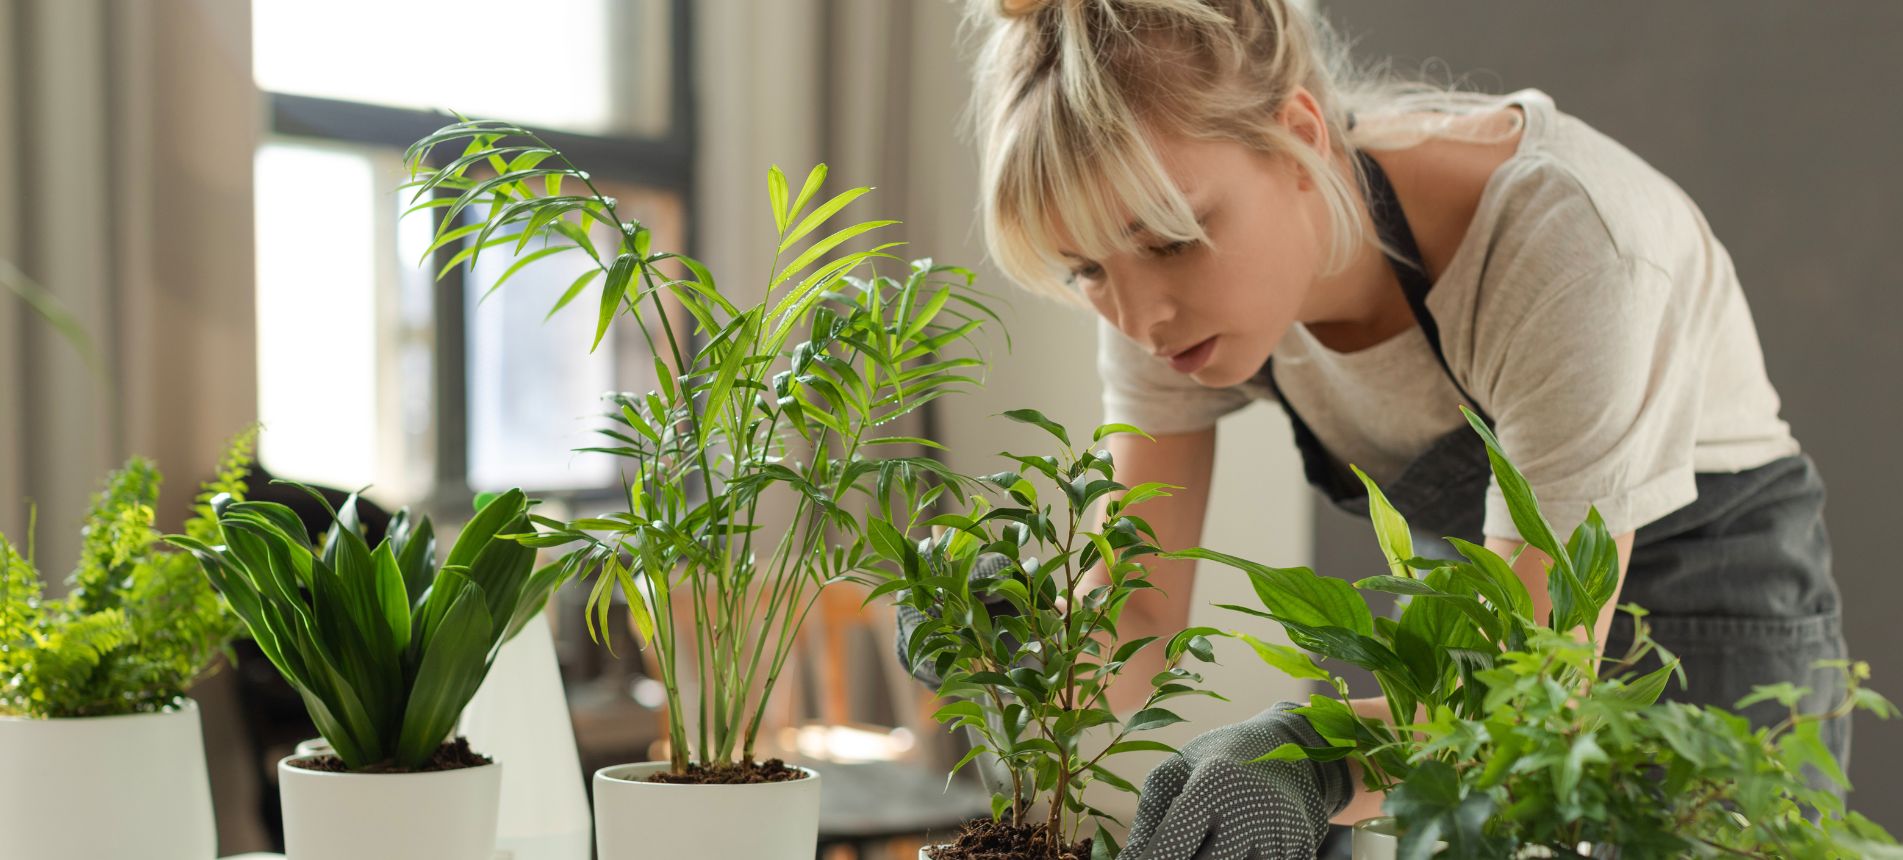 Common Mistakes Made by Beginner Plant Owners